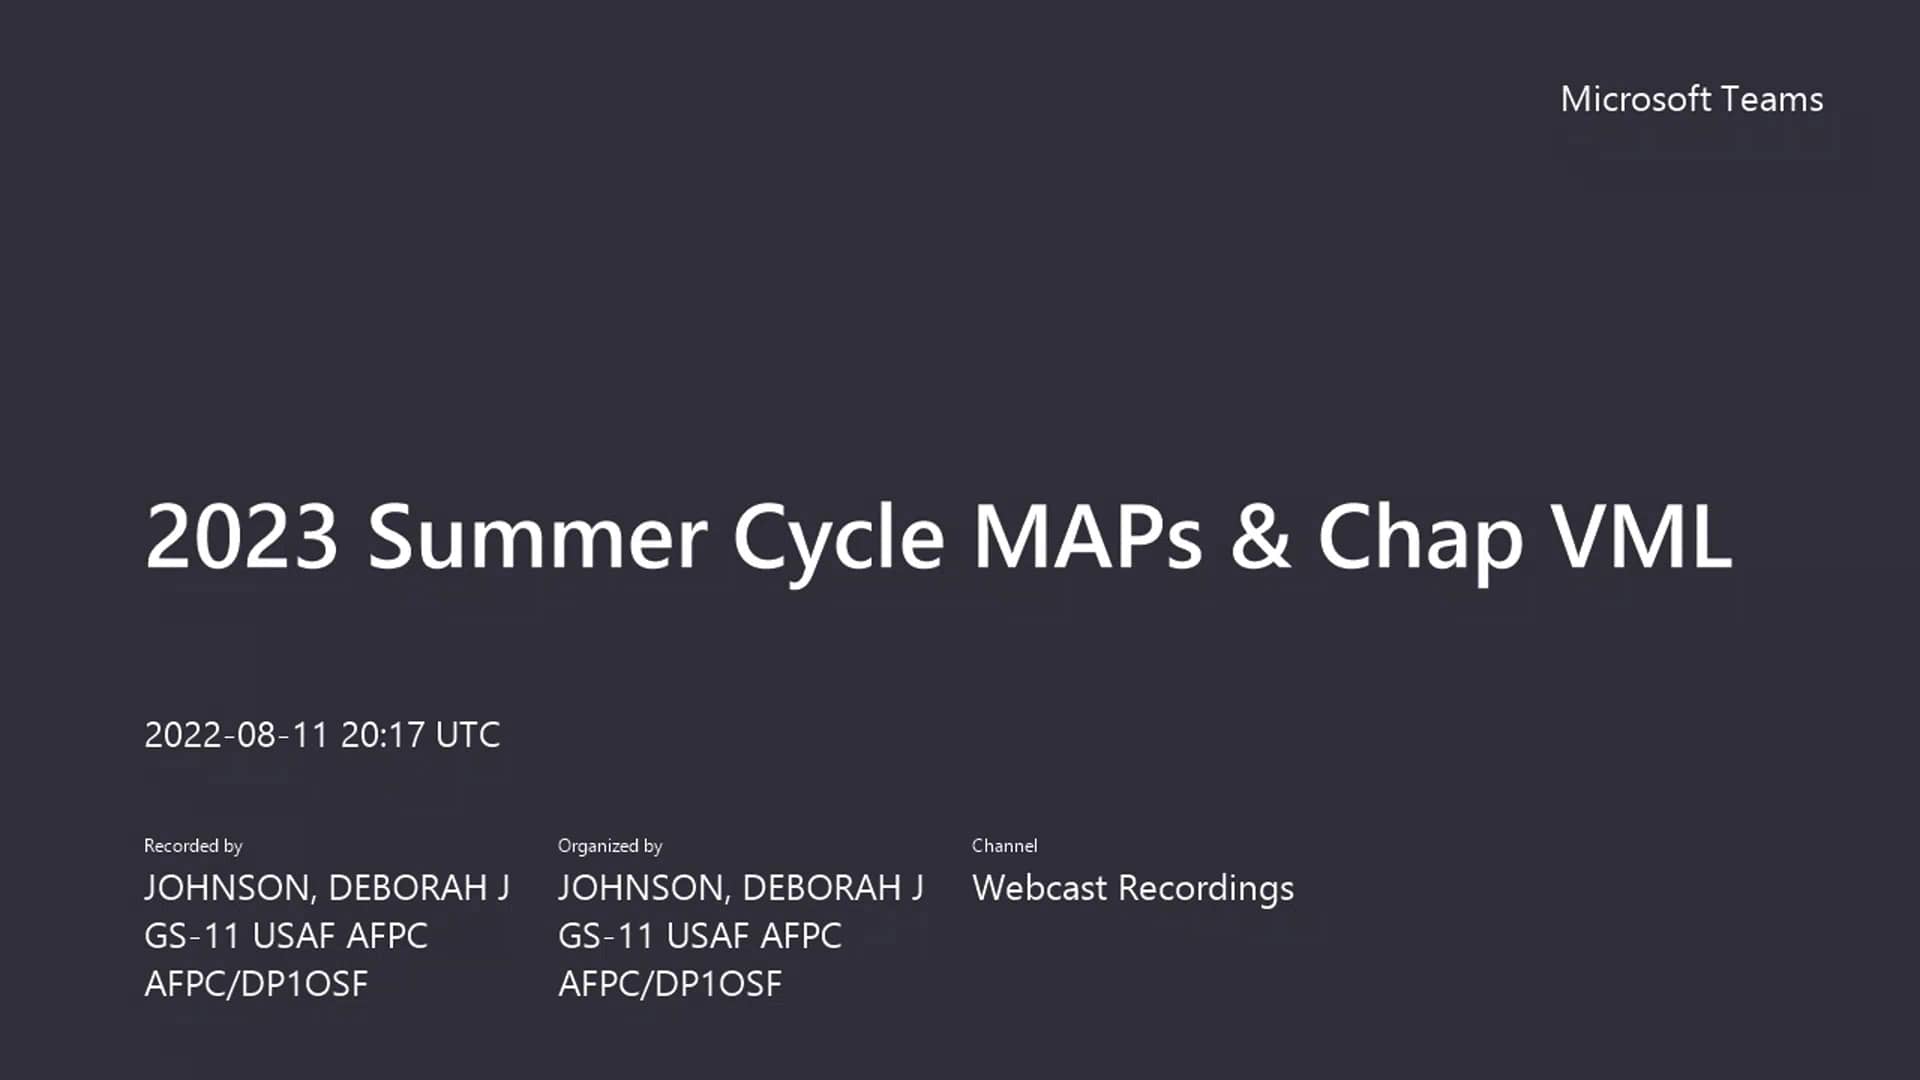 2023 Summer Cycle MAPs and Bidding for Chap on the VML (final).mp4 on Vimeo